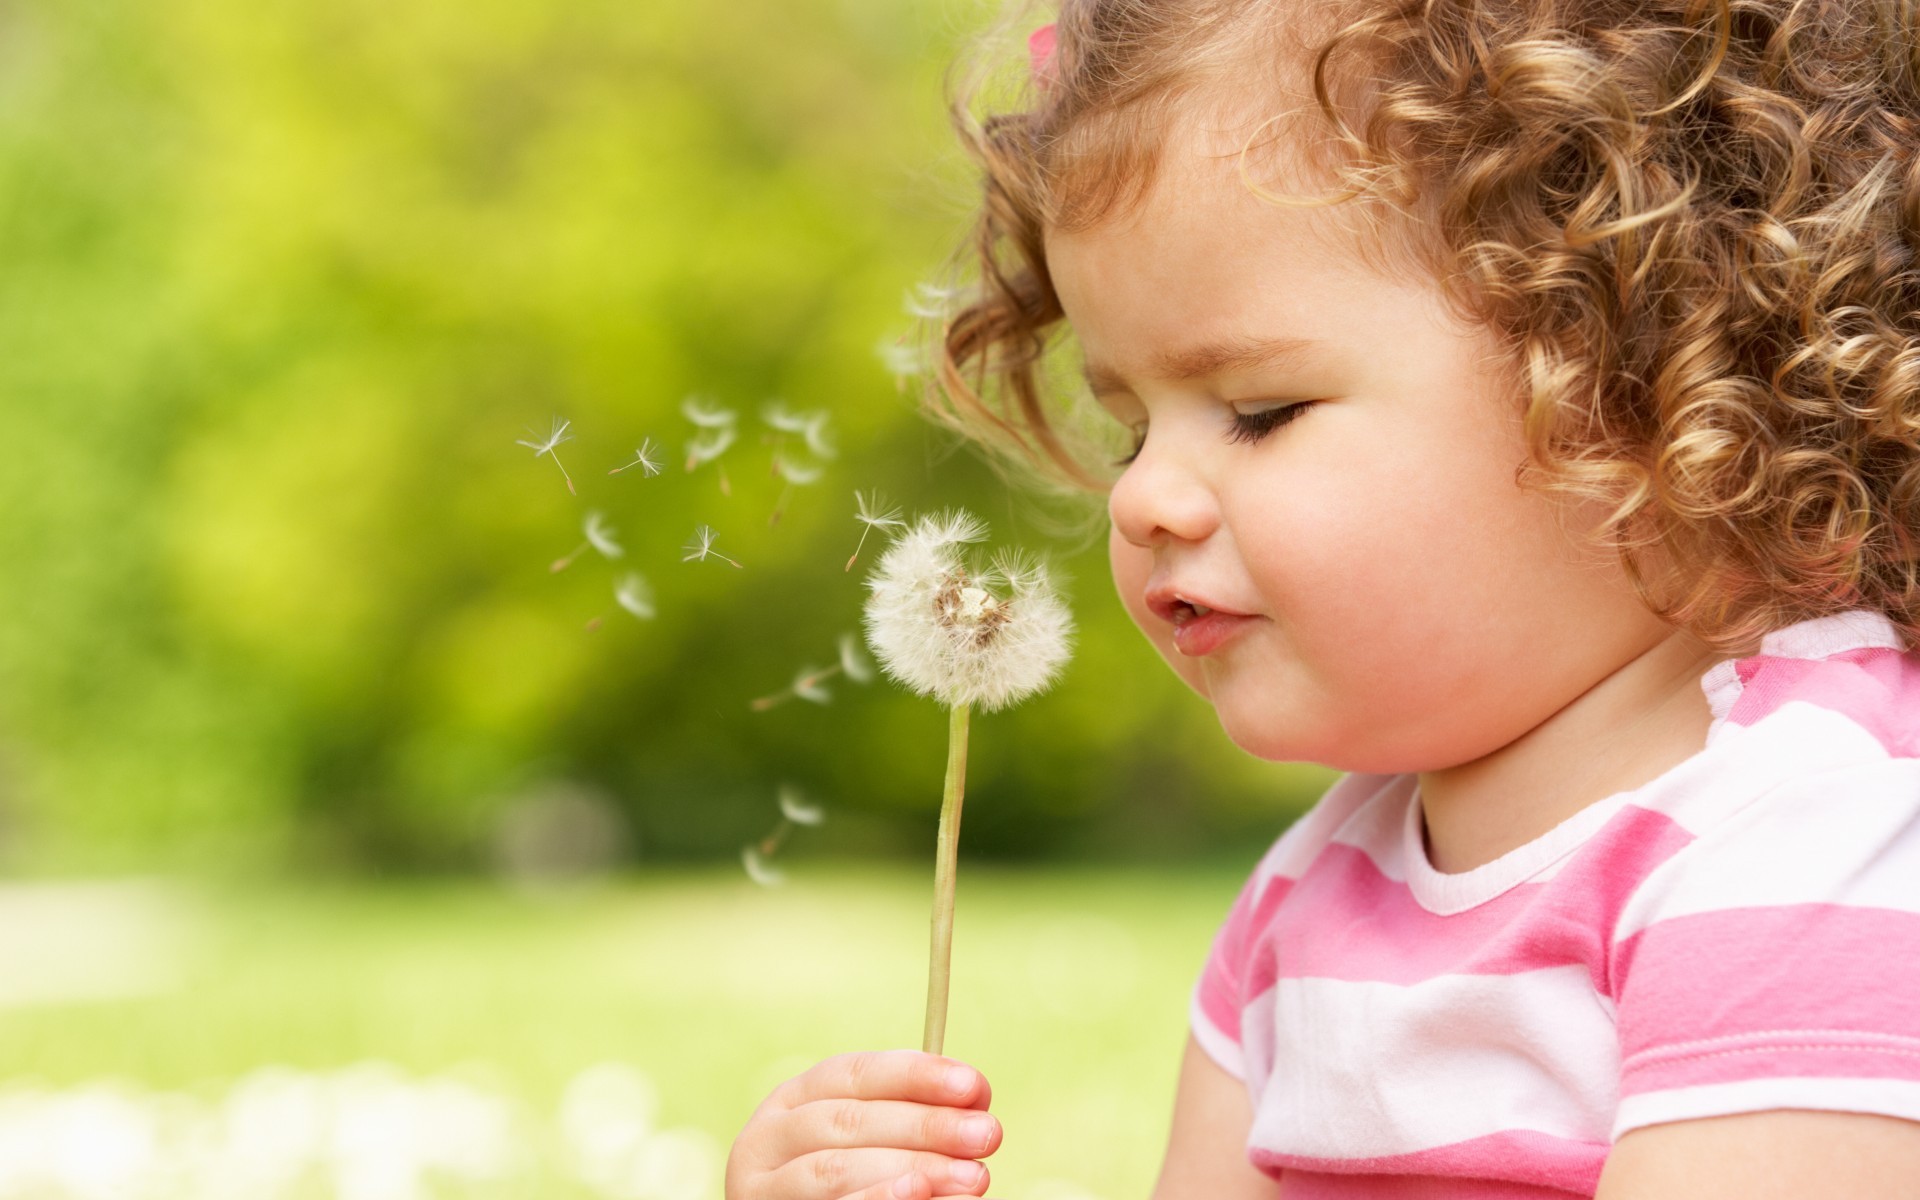 The child blows on a dandelion wallpapers and images 1920x1200